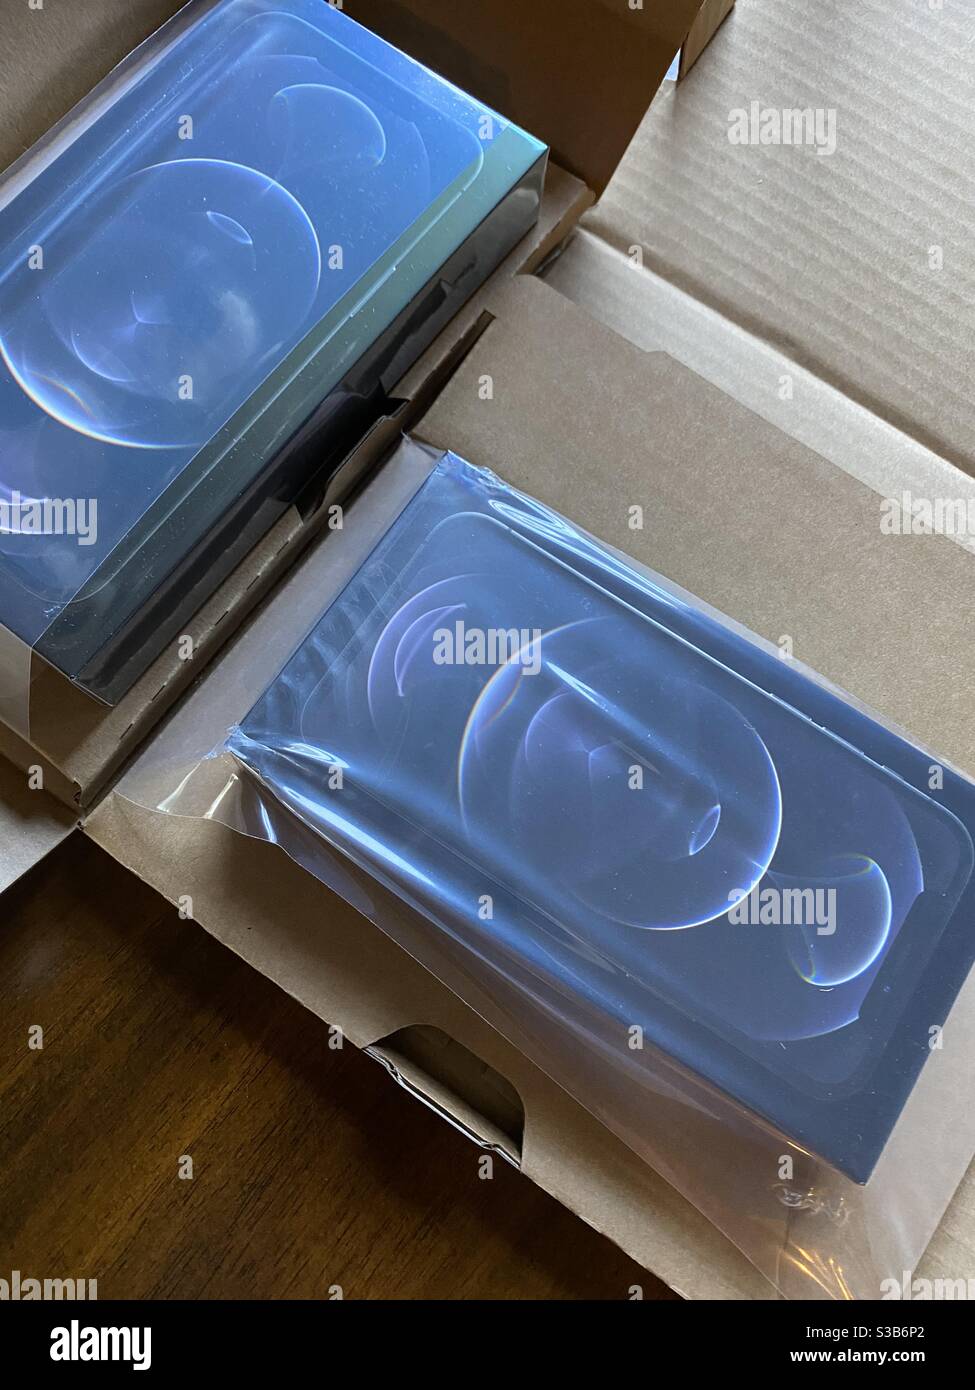 New Apple iPhone 12 pro and pro max phones with shipping boxes Stock Photo